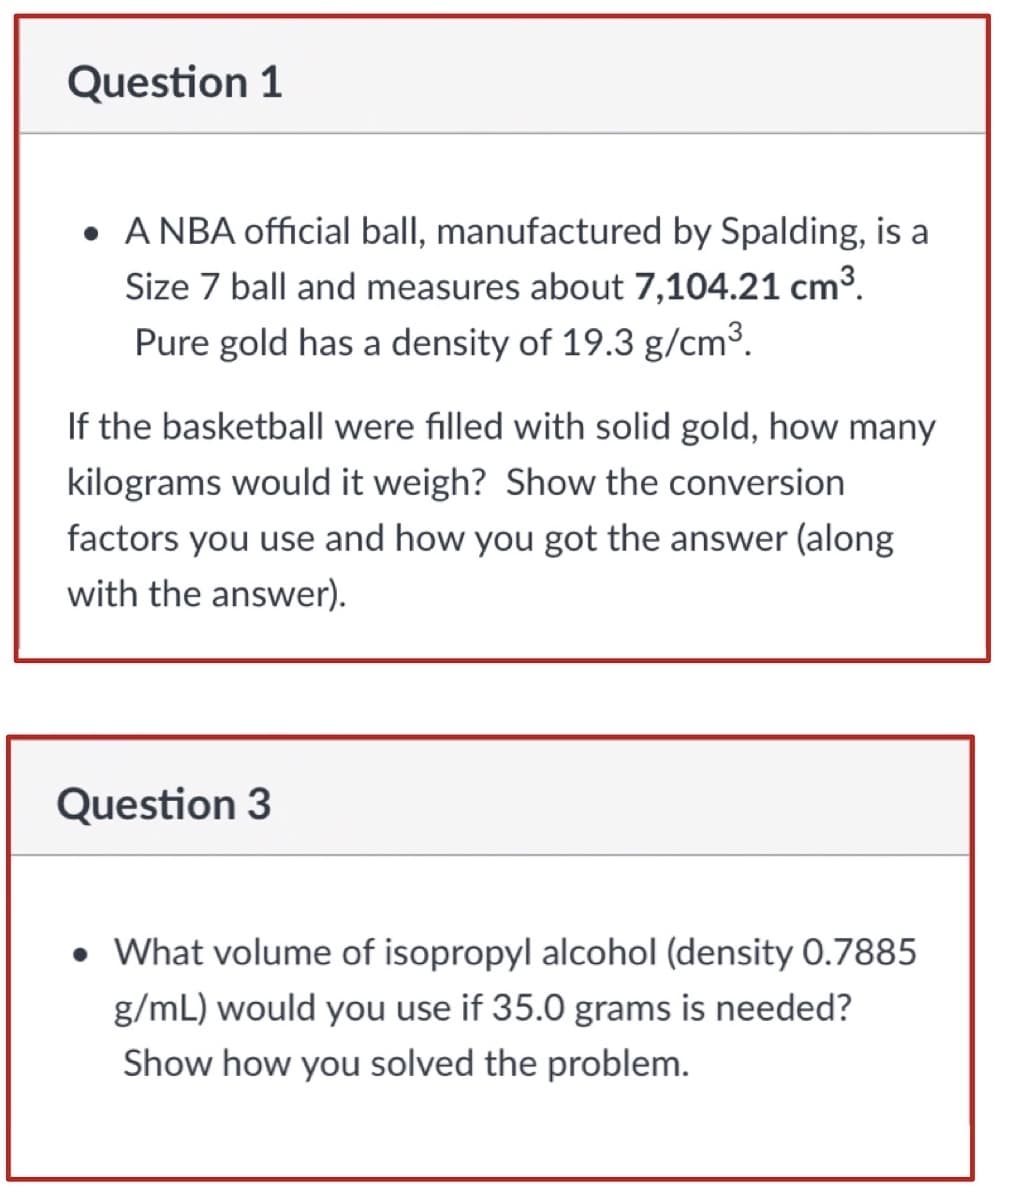 Question 1
• A NBA official ball, manufactured by Spalding, is a
Size 7 ball and measures about 7,104.21 cm3.
Pure gold has a density of 19.3 g/cm3.
If the basketball were filled with solid gold, how many
kilograms would it weigh? Show the conversion
factors you use and how you got the answer (along
with the answer).
Question 3
• What volume of isopropyl alcohol (density 0.7885
g/mL) would you use if 35.0 grams is needed?
Show how you solved the problem.
